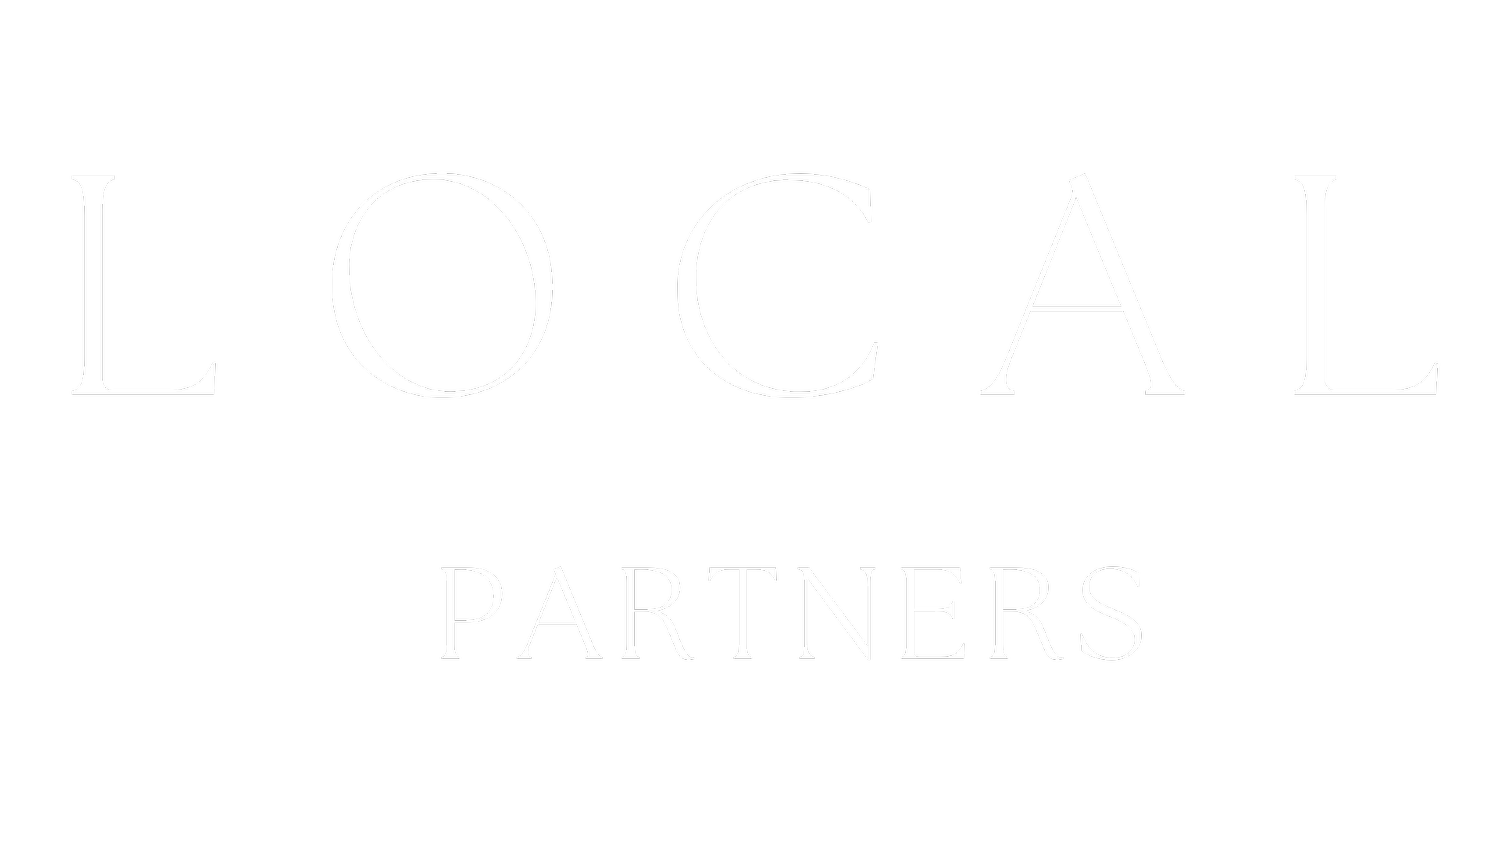 LOCAL PARTNERS